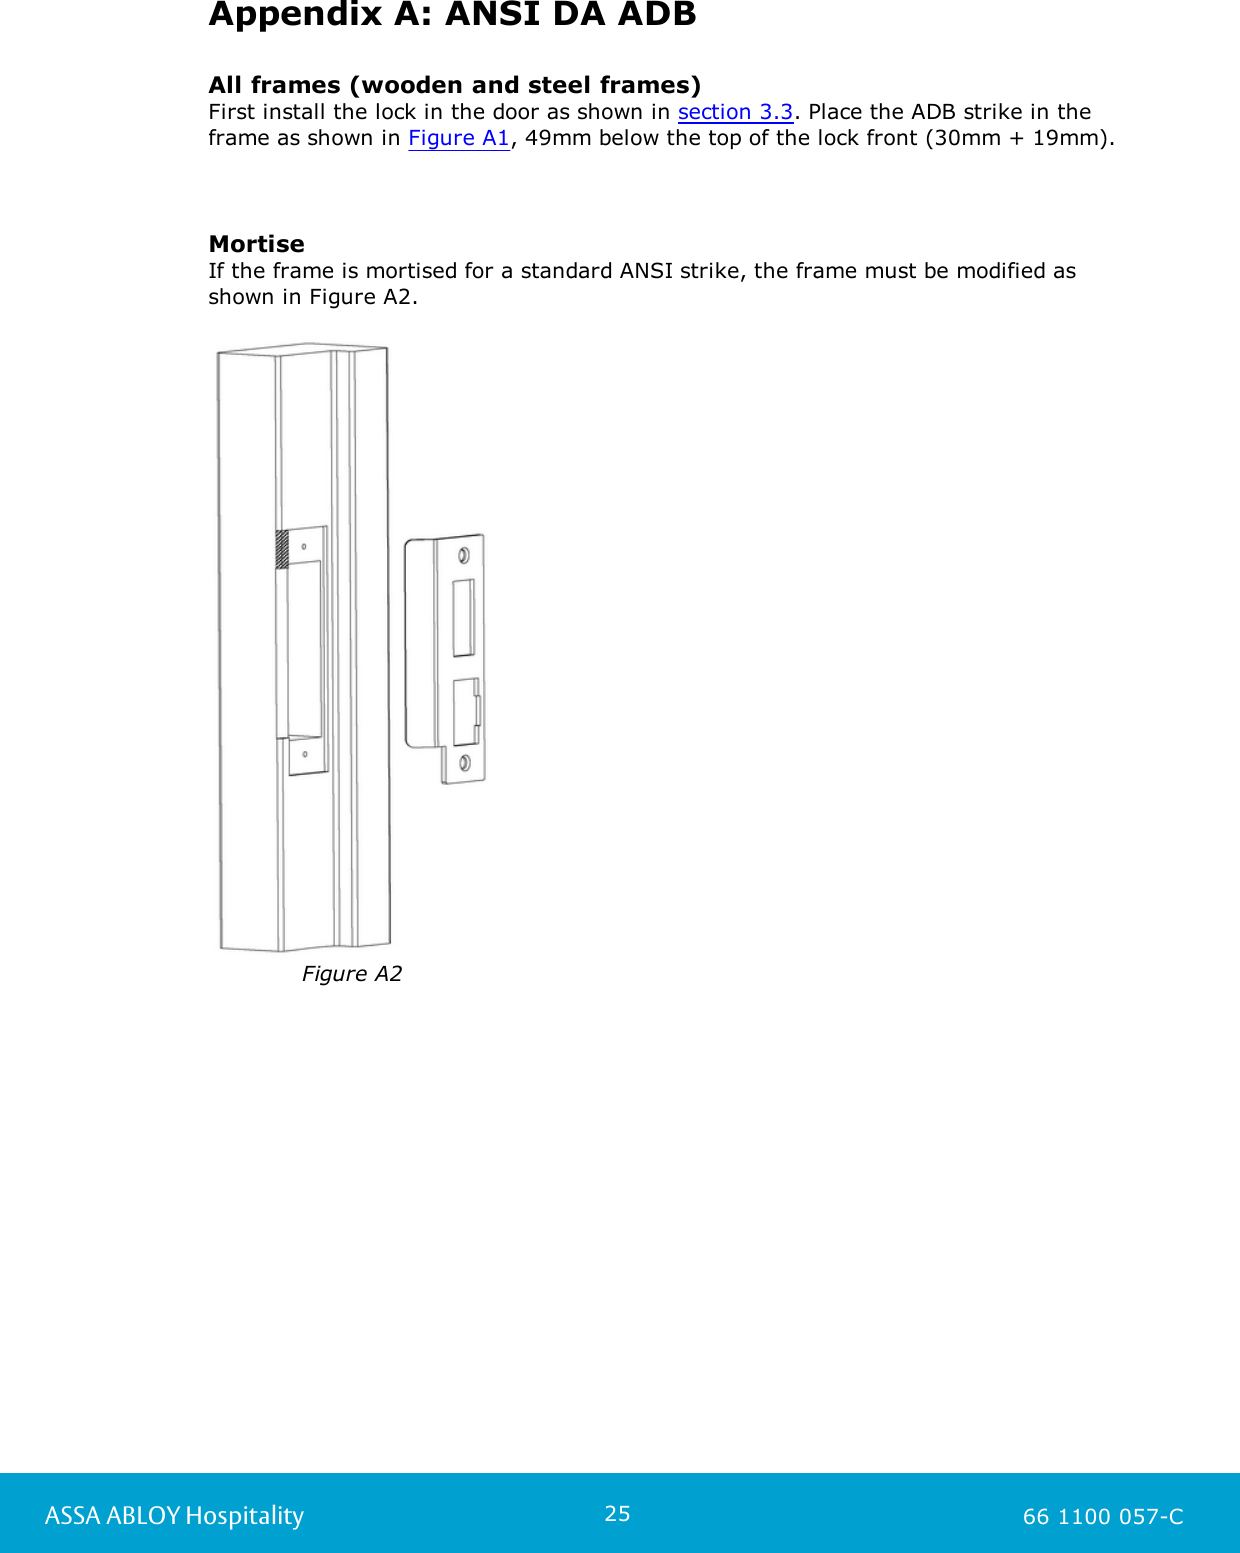 25ASSA ABLOY Hospitality 66 1100 057-CAppendix A: ANSI DA ADBAll frames (wooden and steel frames)First install the lock in the door as shown in section 3.3. Place the ADB strike in theframe as shown in Figure A1, 49mm below the top of the lock front (30mm + 19mm).MortiseIf the frame is mortised for a standard ANSI strike, the frame must be modified asshown in Figure A2.Figure A2